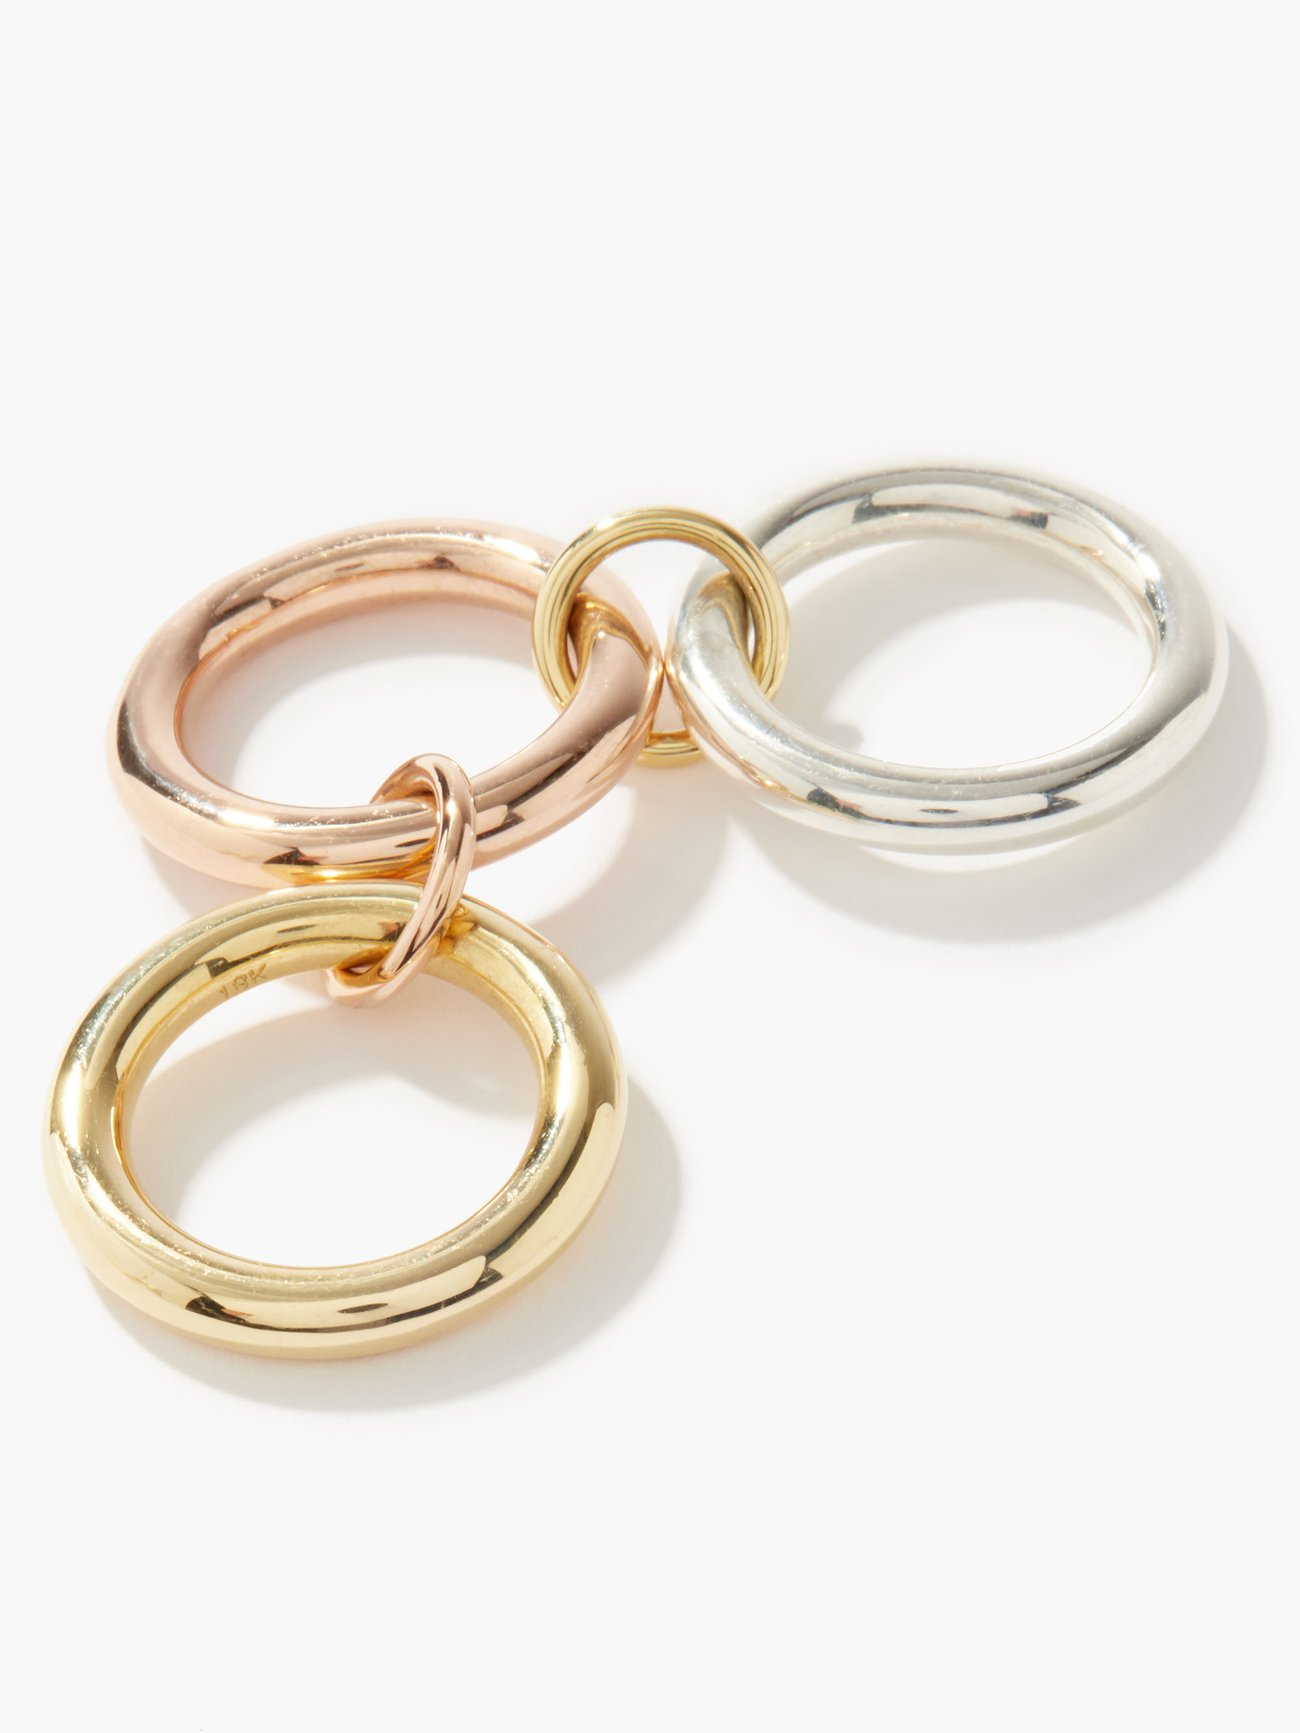 Mercury MX gold, rose-gold & sterling-silver ring